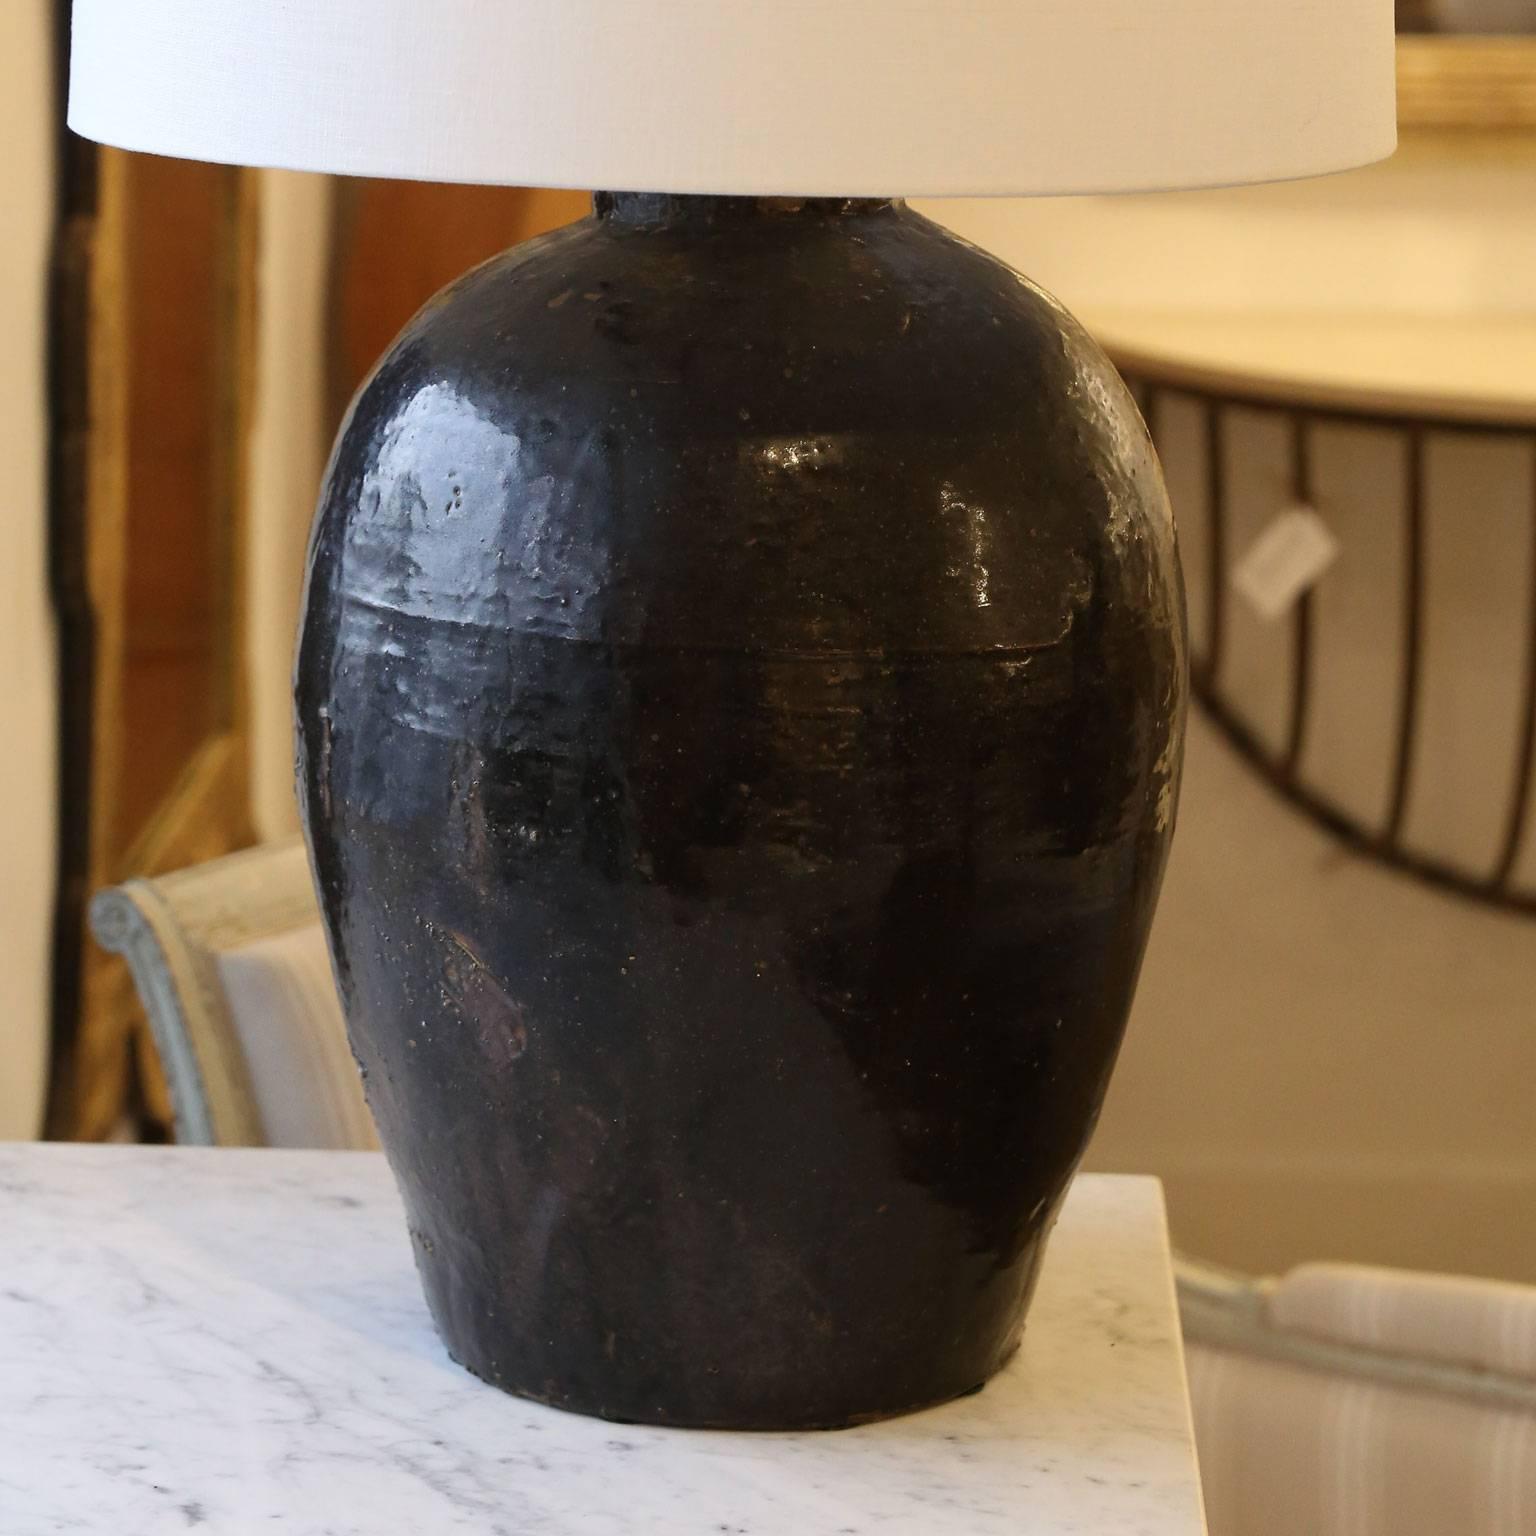 18th century (or earlier) dark chocolate color glazed terracotta French urn, newly wired as a custom table lamp with a rolled-edge linen shallow drum shade. This lamp is French-wired to avoid drilling into the piece, so it may be reused as an urn or